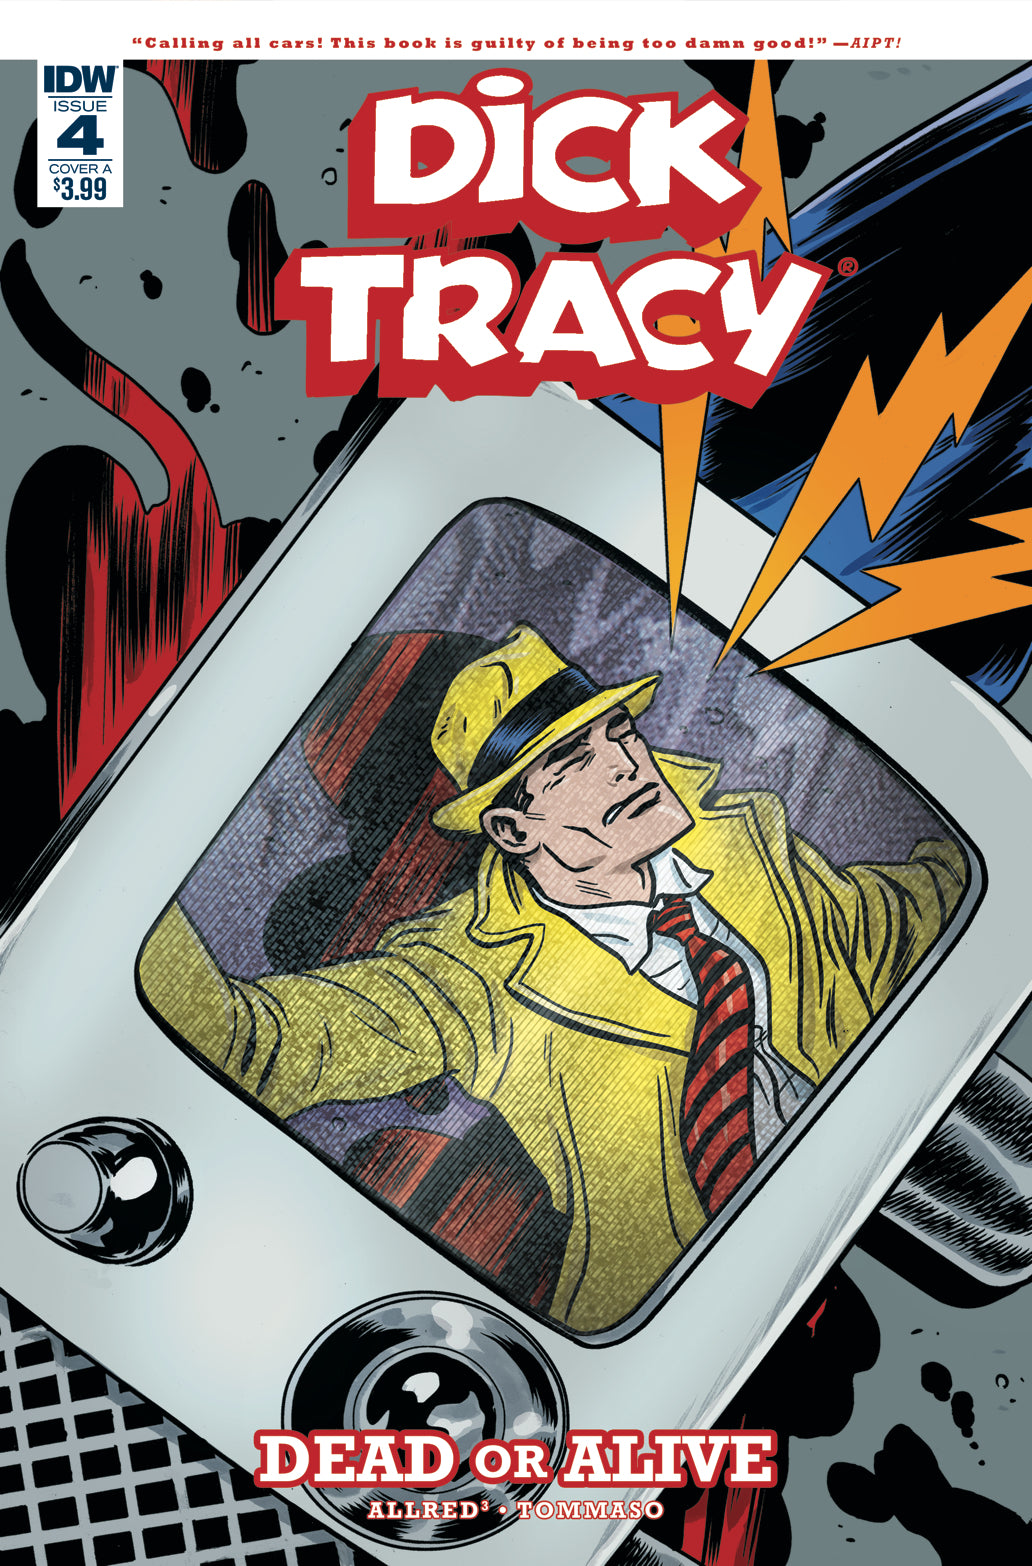 DICK TRACY DEAD OR ALIVE #4 (OF 4) CVR A ALLRED COVER